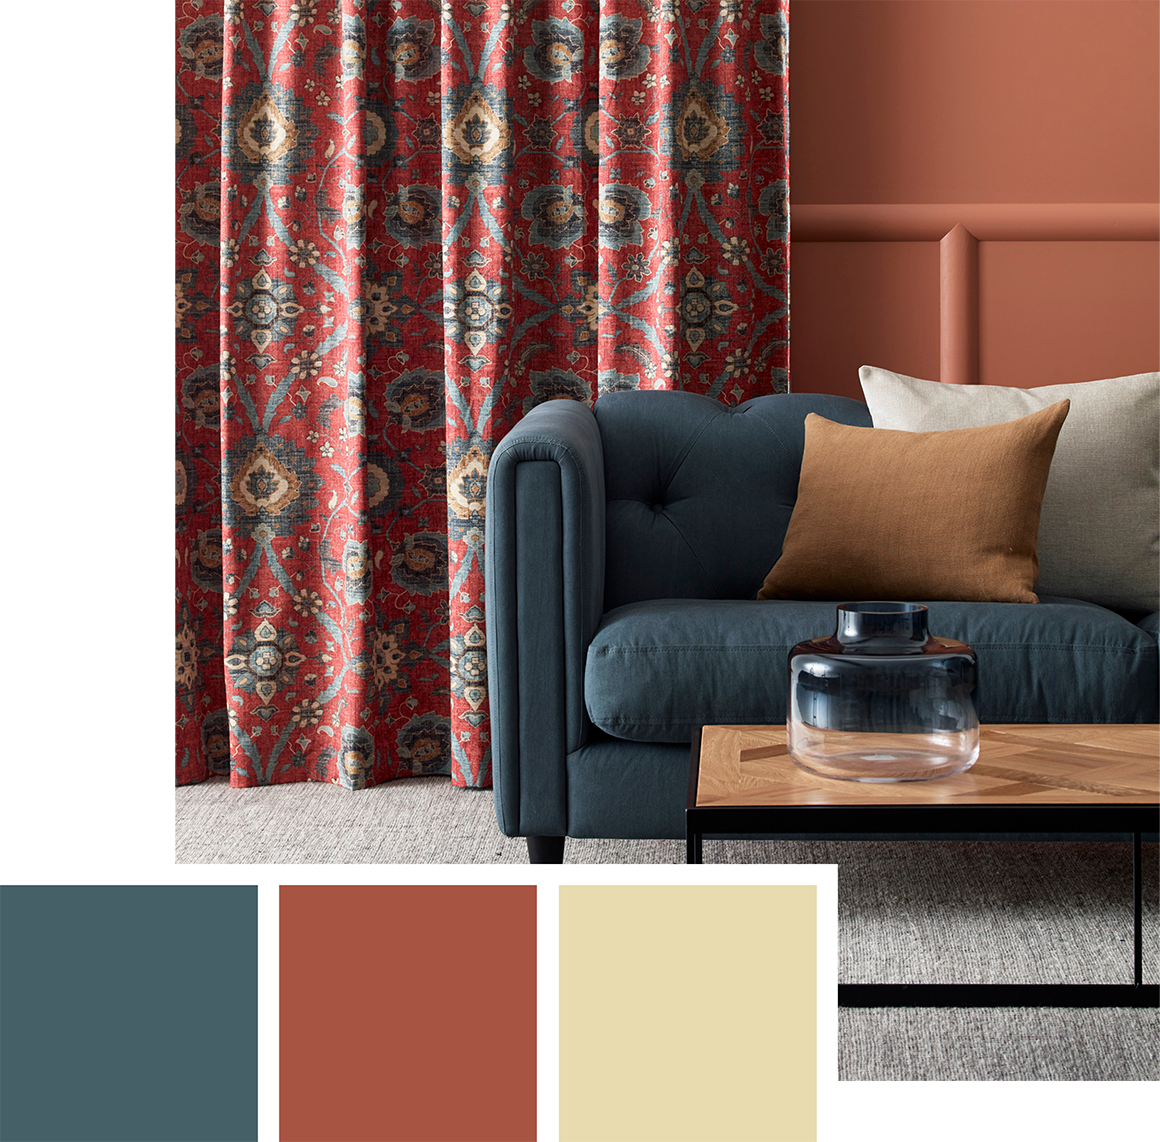 red navy blue brown decorative pattern curtains in contemporary lounge room on tan brown walls